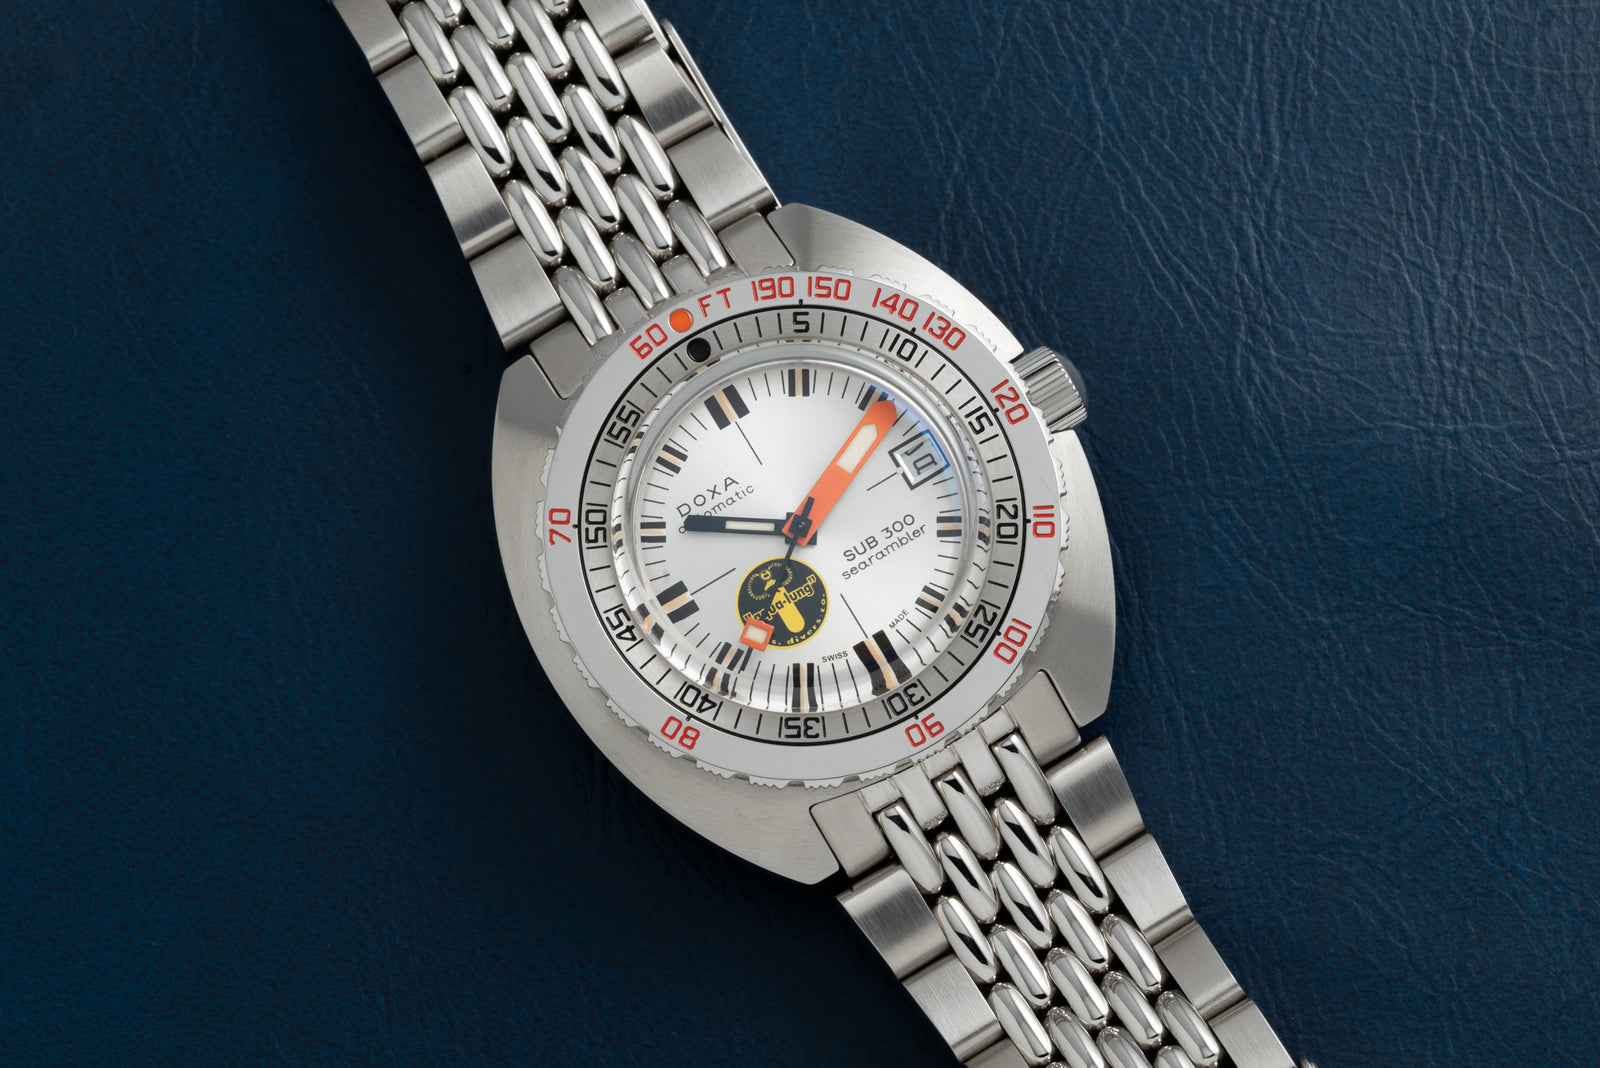 DOXA Sub 300 'Silver Lung' Limited Edition